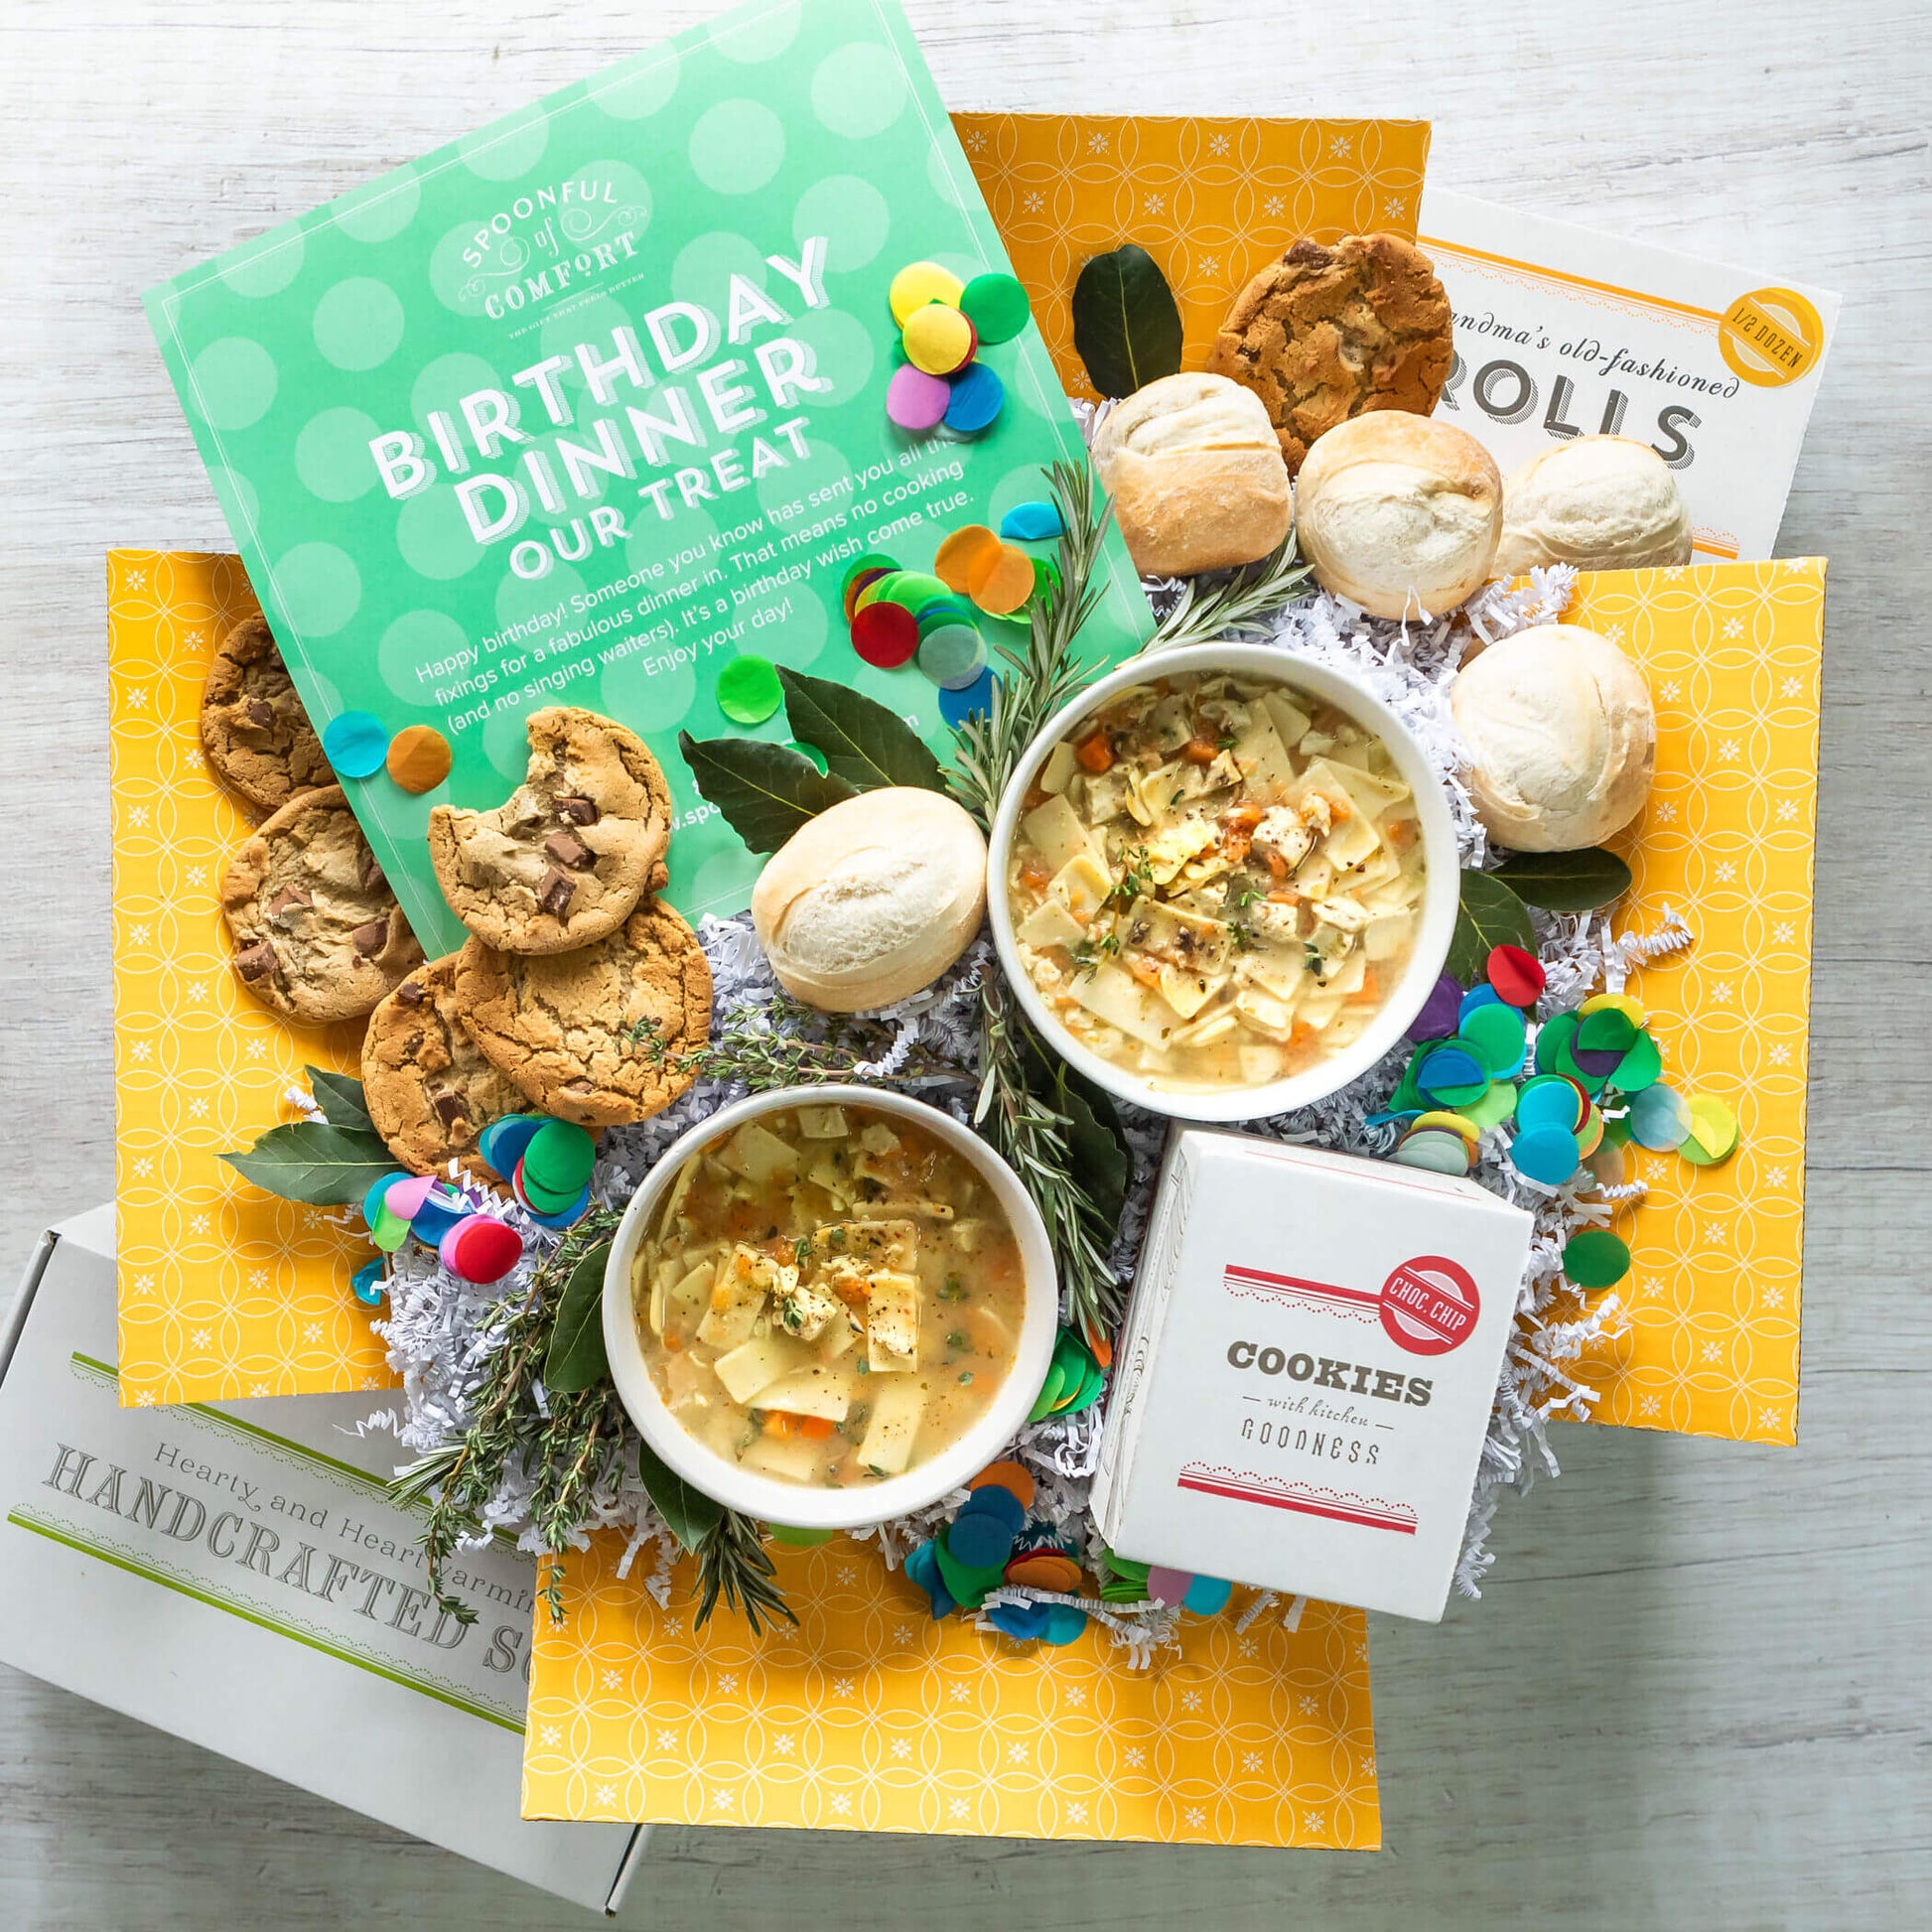 Birthday Care Package, Two bowls of chicken noodle soup surrounded by rolls and cookies and colorful confetti. Insert in image reads: Birthday Dinner our Treat